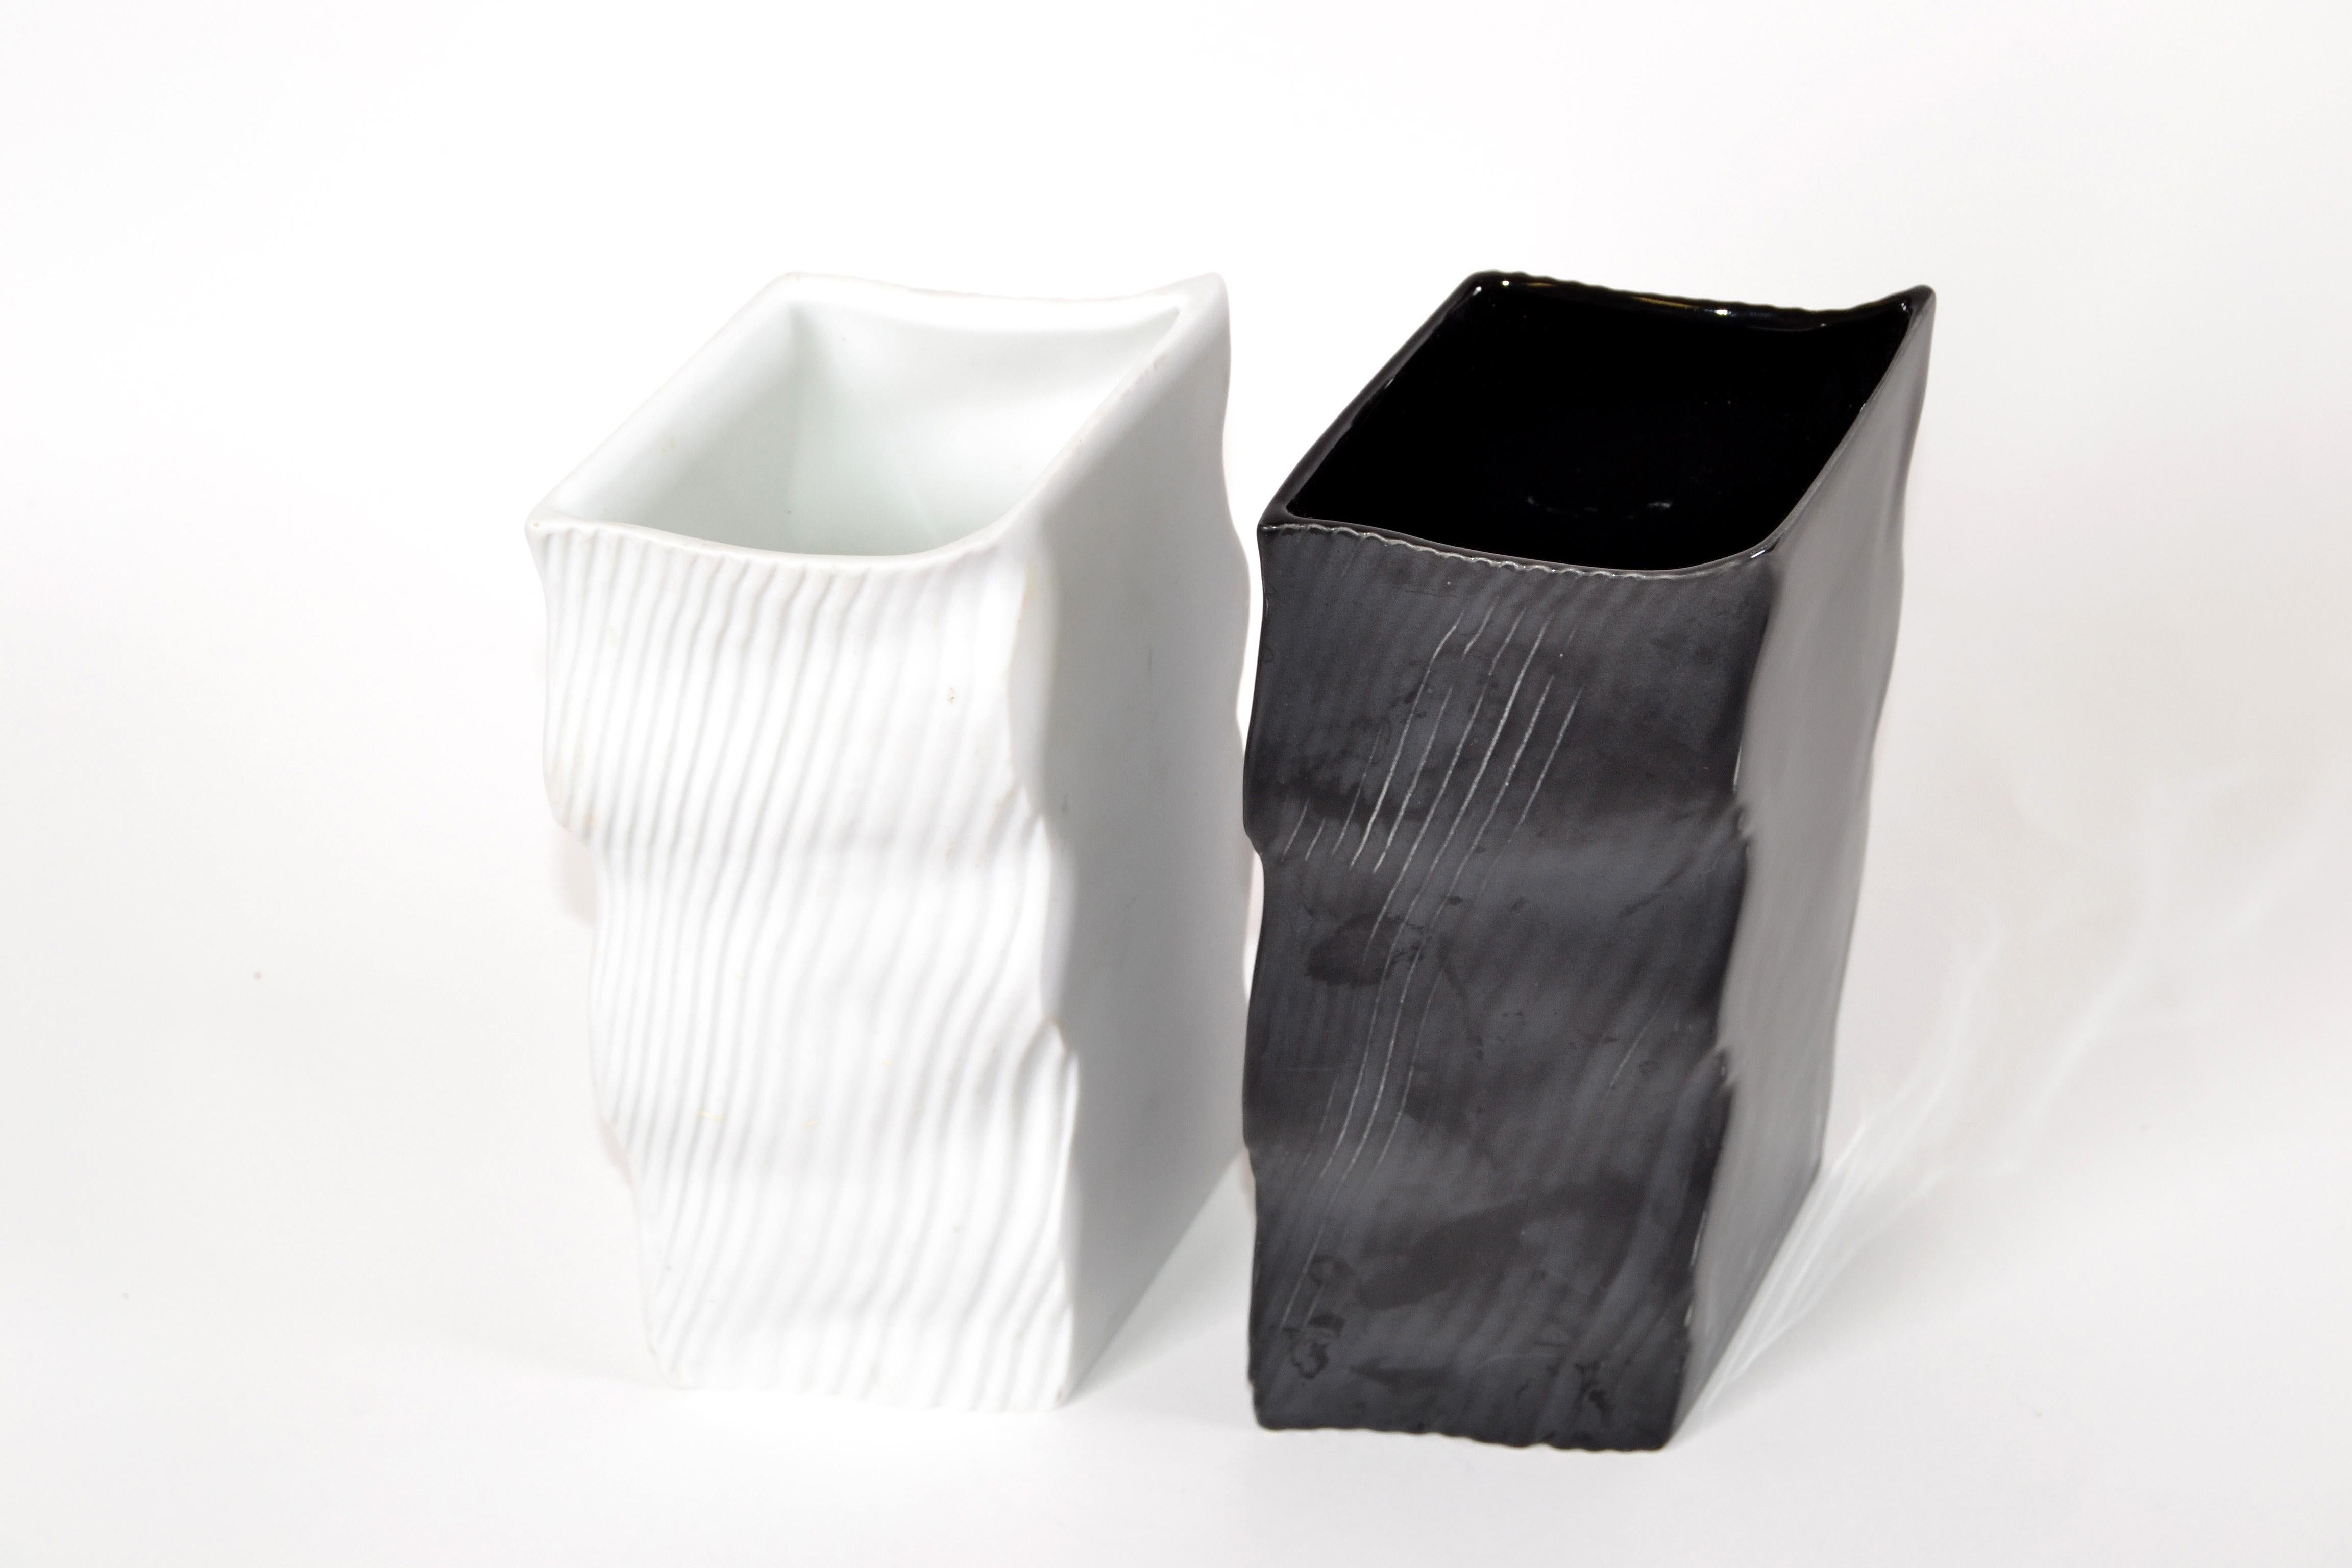 Set of 2 Mikasa Japan ceramic black and white vases with wave design Mid-Century Modern.
Original label at the base.